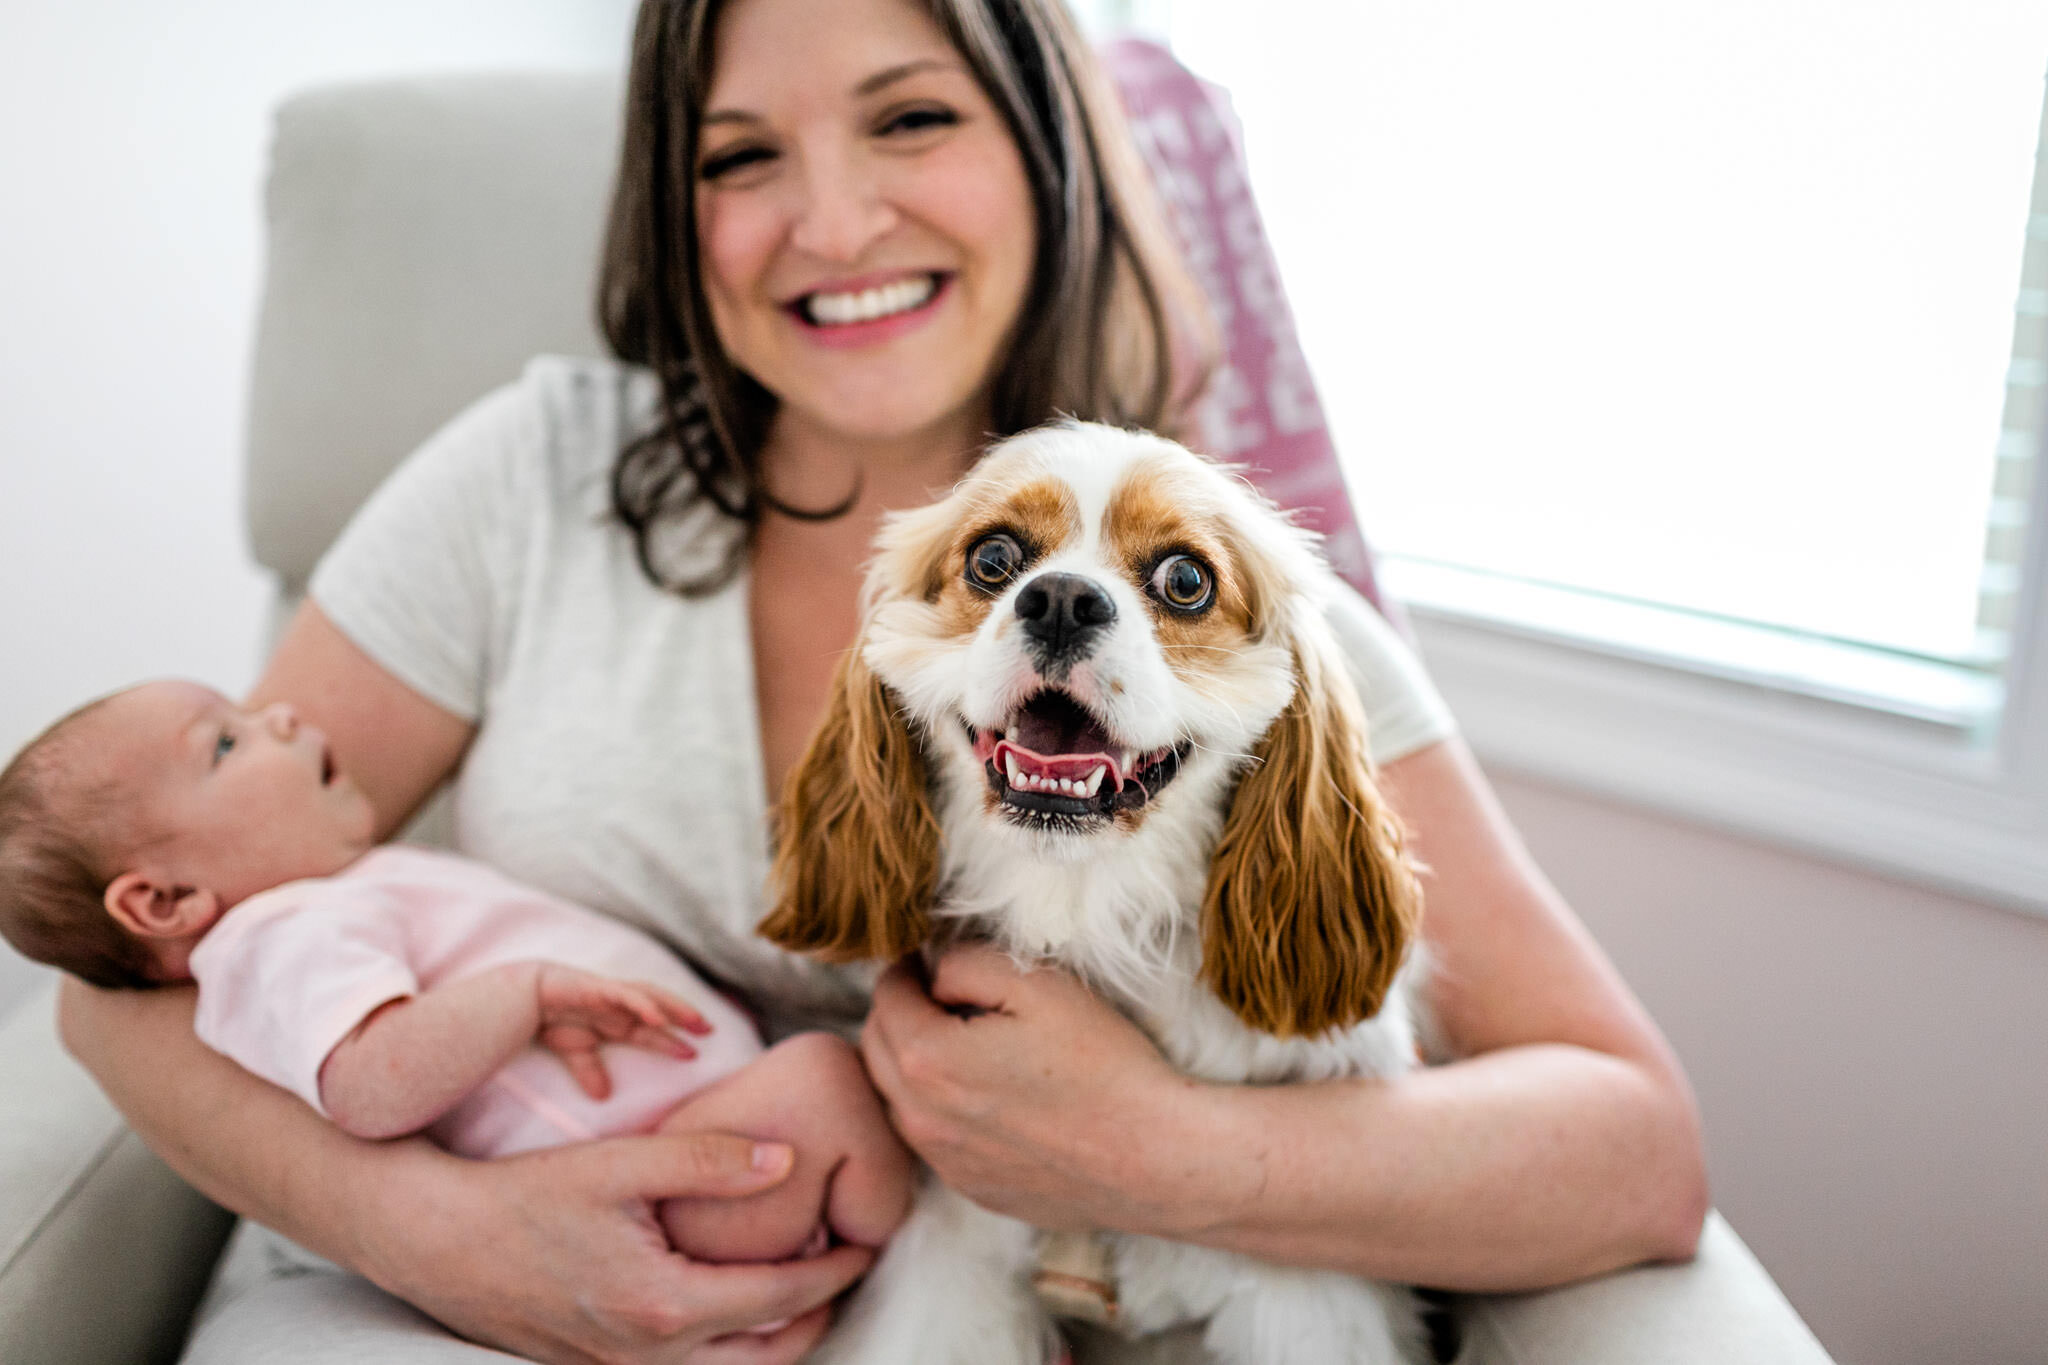 Dog smiling at camera | Durham Newborn Photographer | By G. Lin Photography